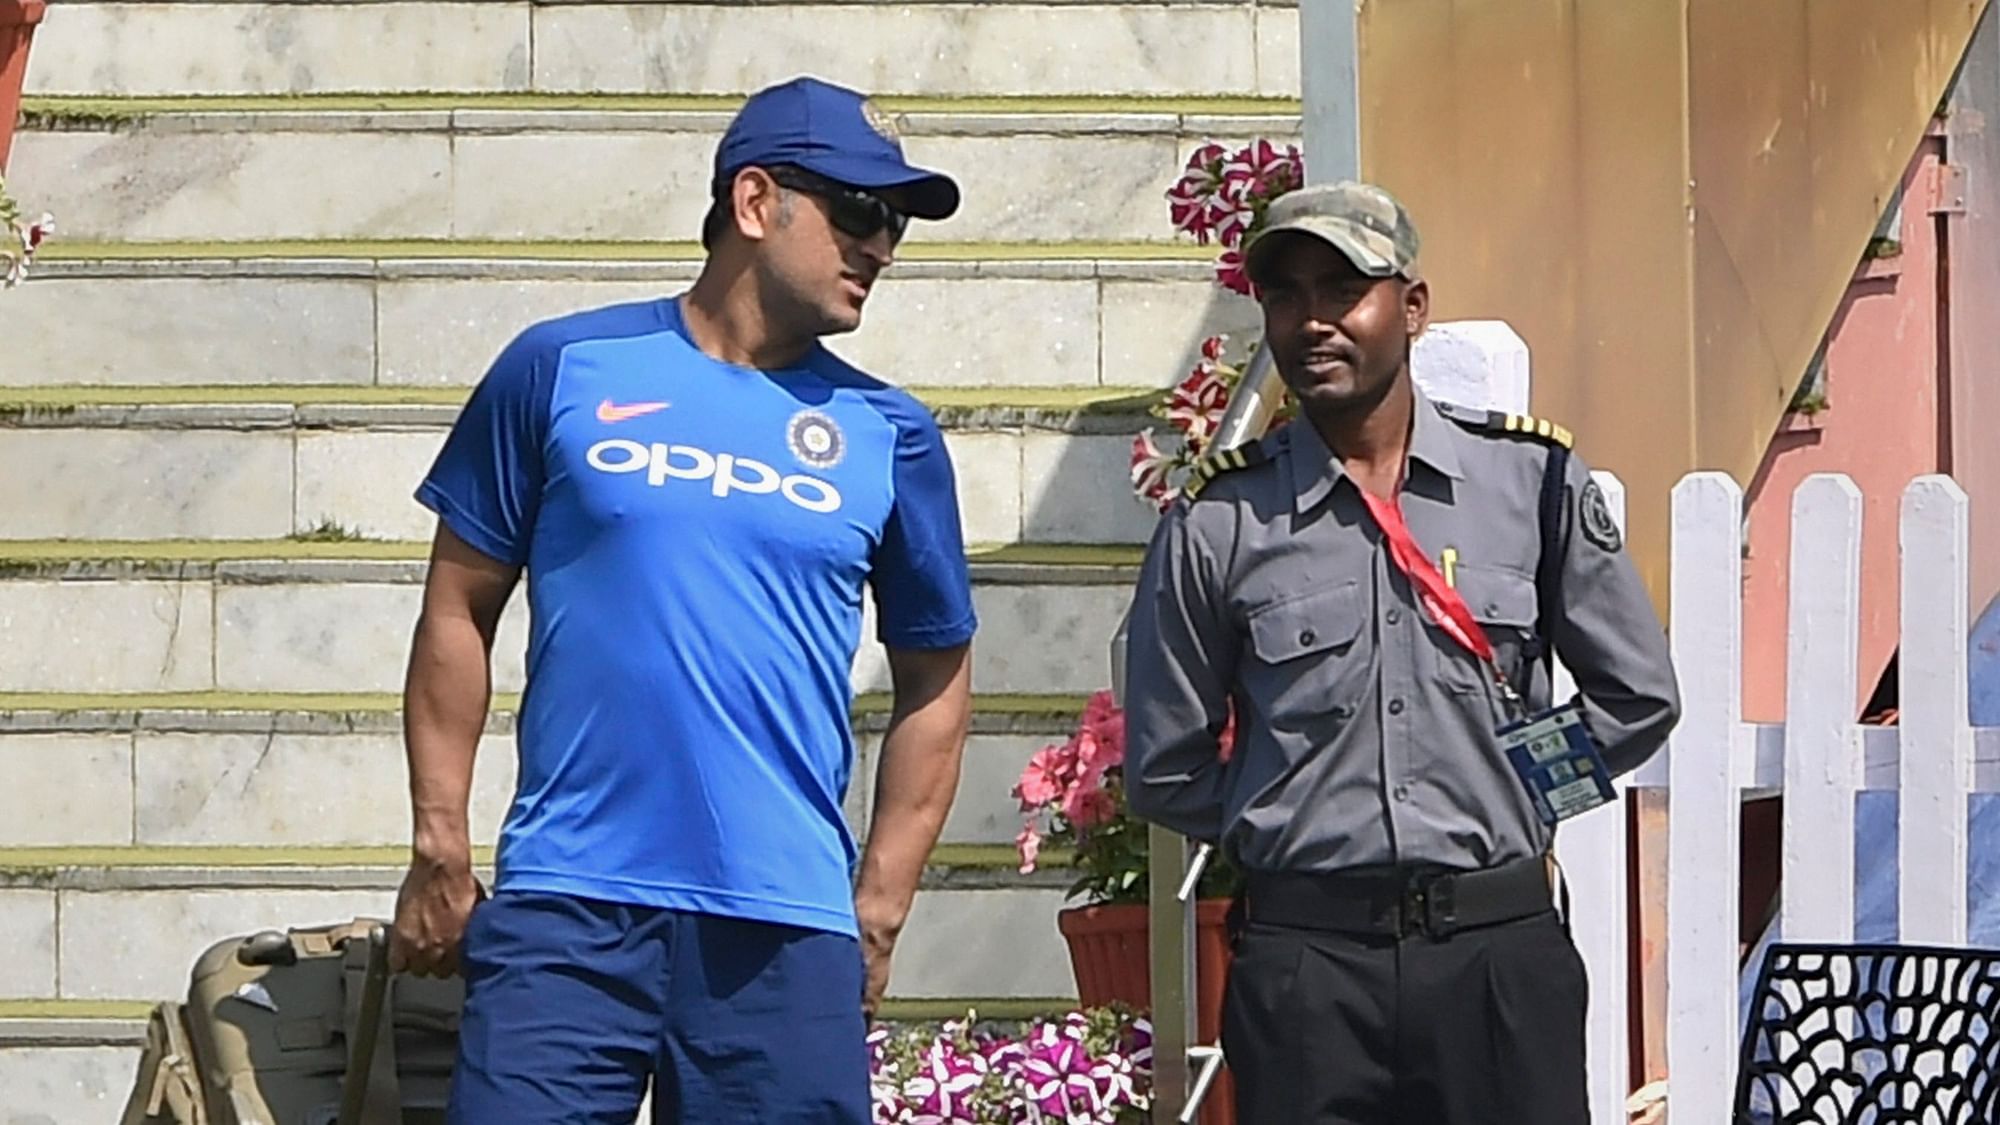 MS Dhoni interacts with a security guard during a training session ahead of the 3rd ODI match against Australia at JSCA Stadium, in Ranchi on 7 March, 2019.